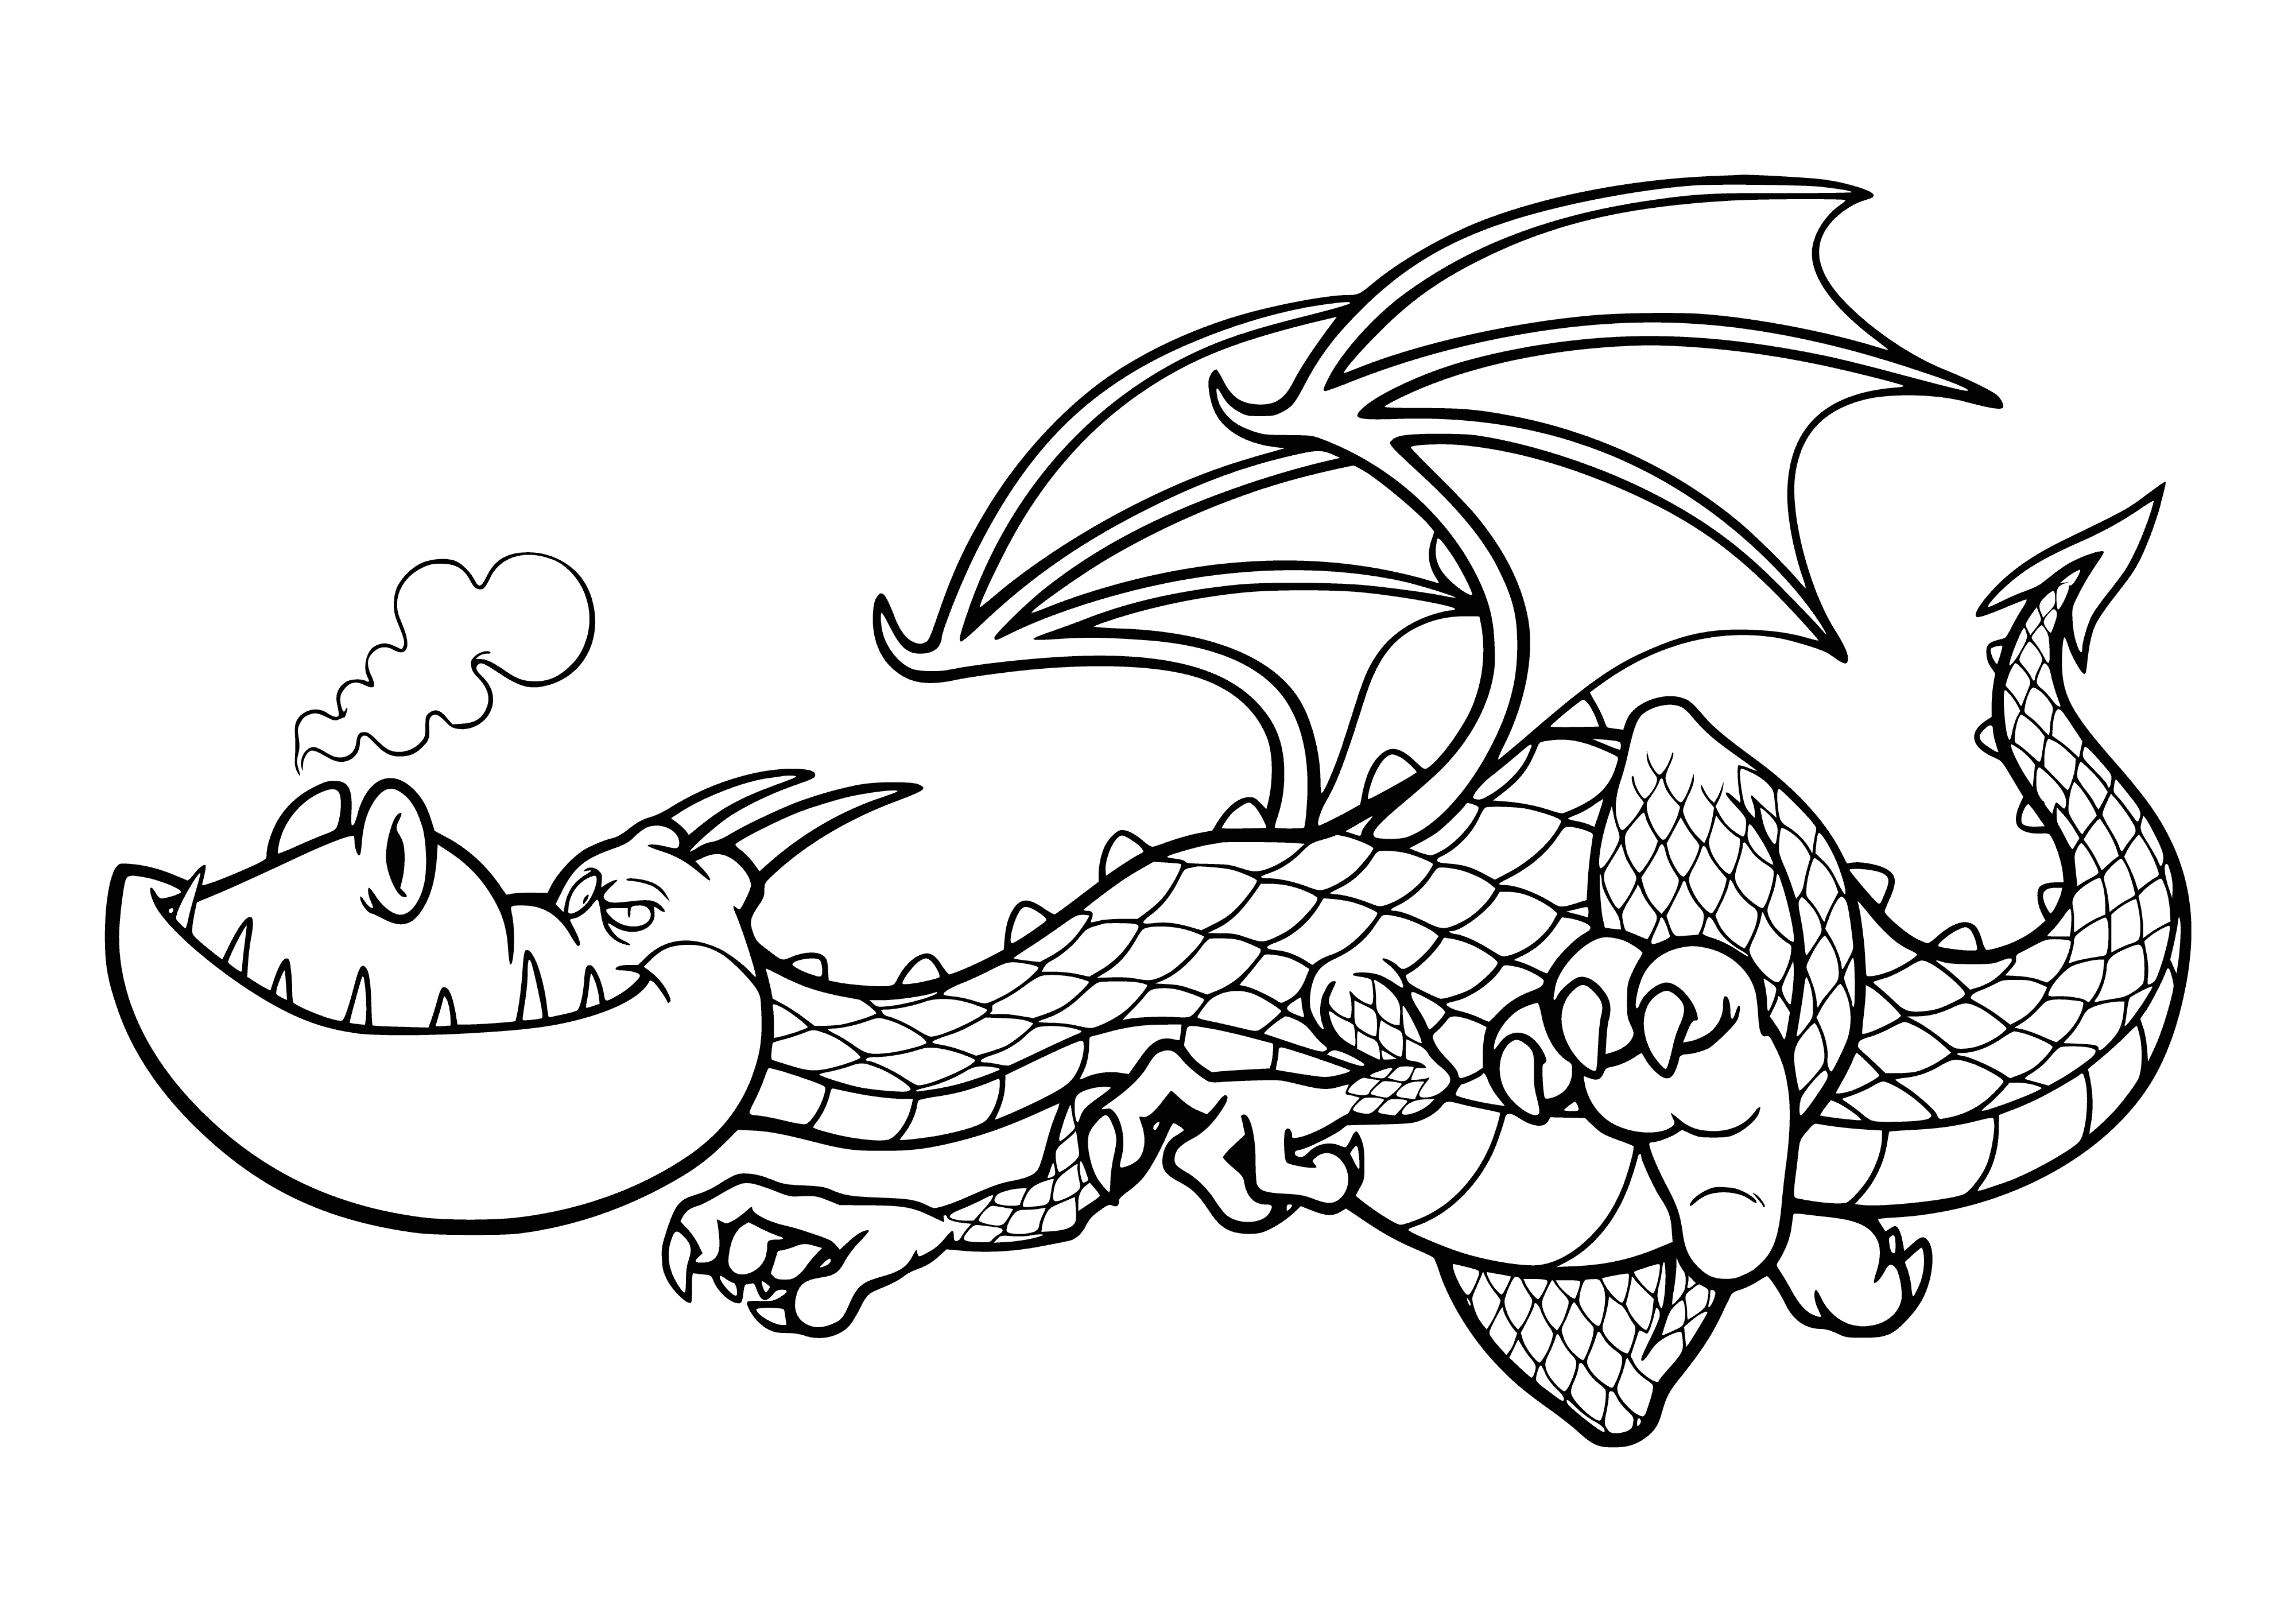 coloring page: Dragon sleeping peacefully, its scales a rainbow of colors. Its wings folded, its tail wrapped tight, danger lurking beneath its calm.